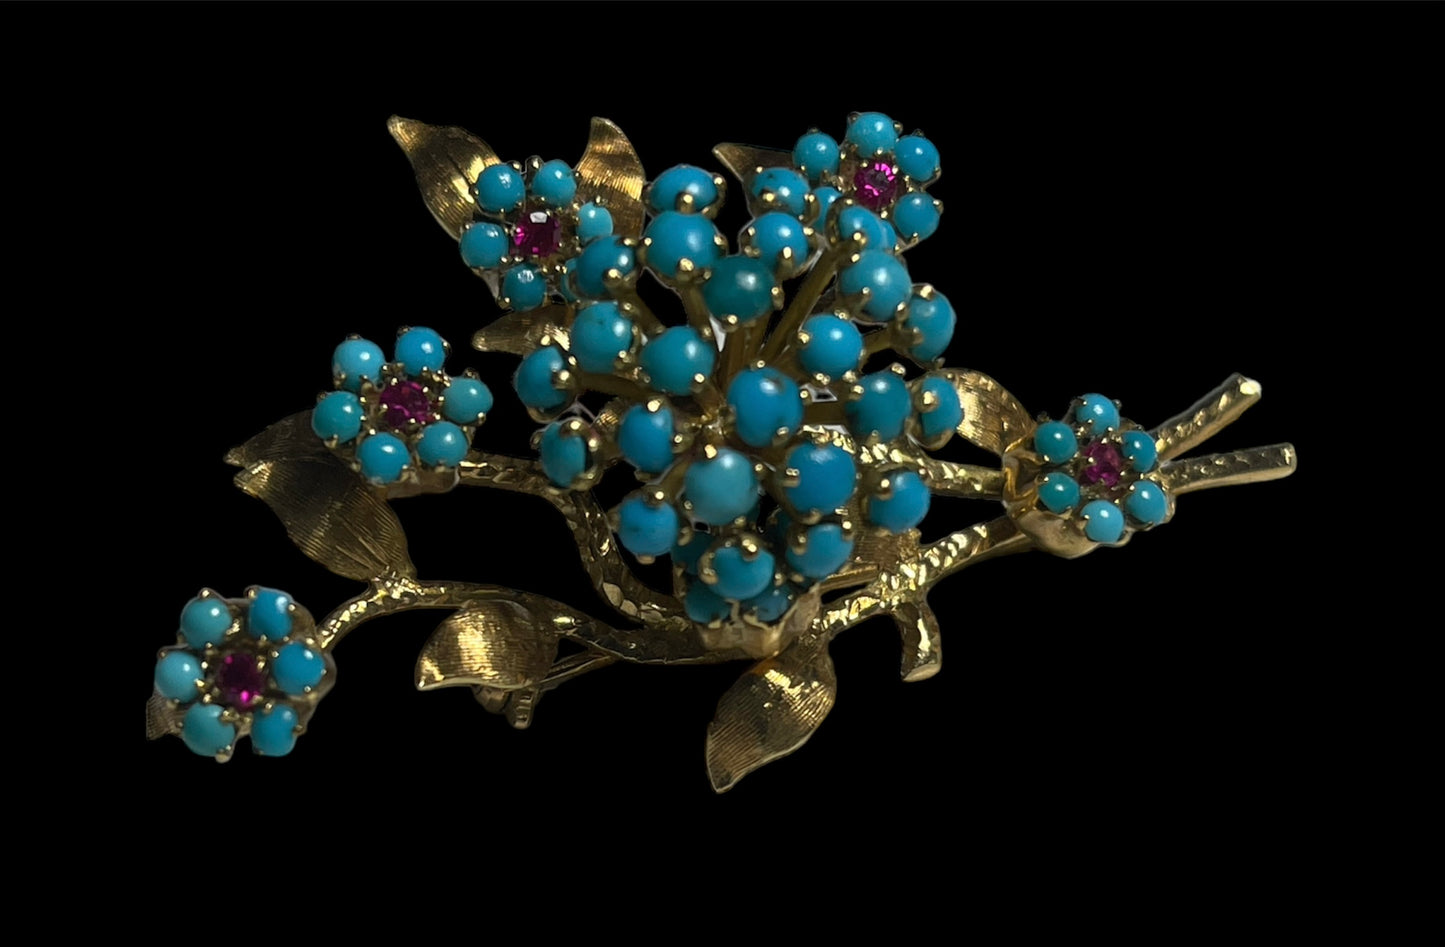 A 14k gold brooch with turquoise and ruby stones